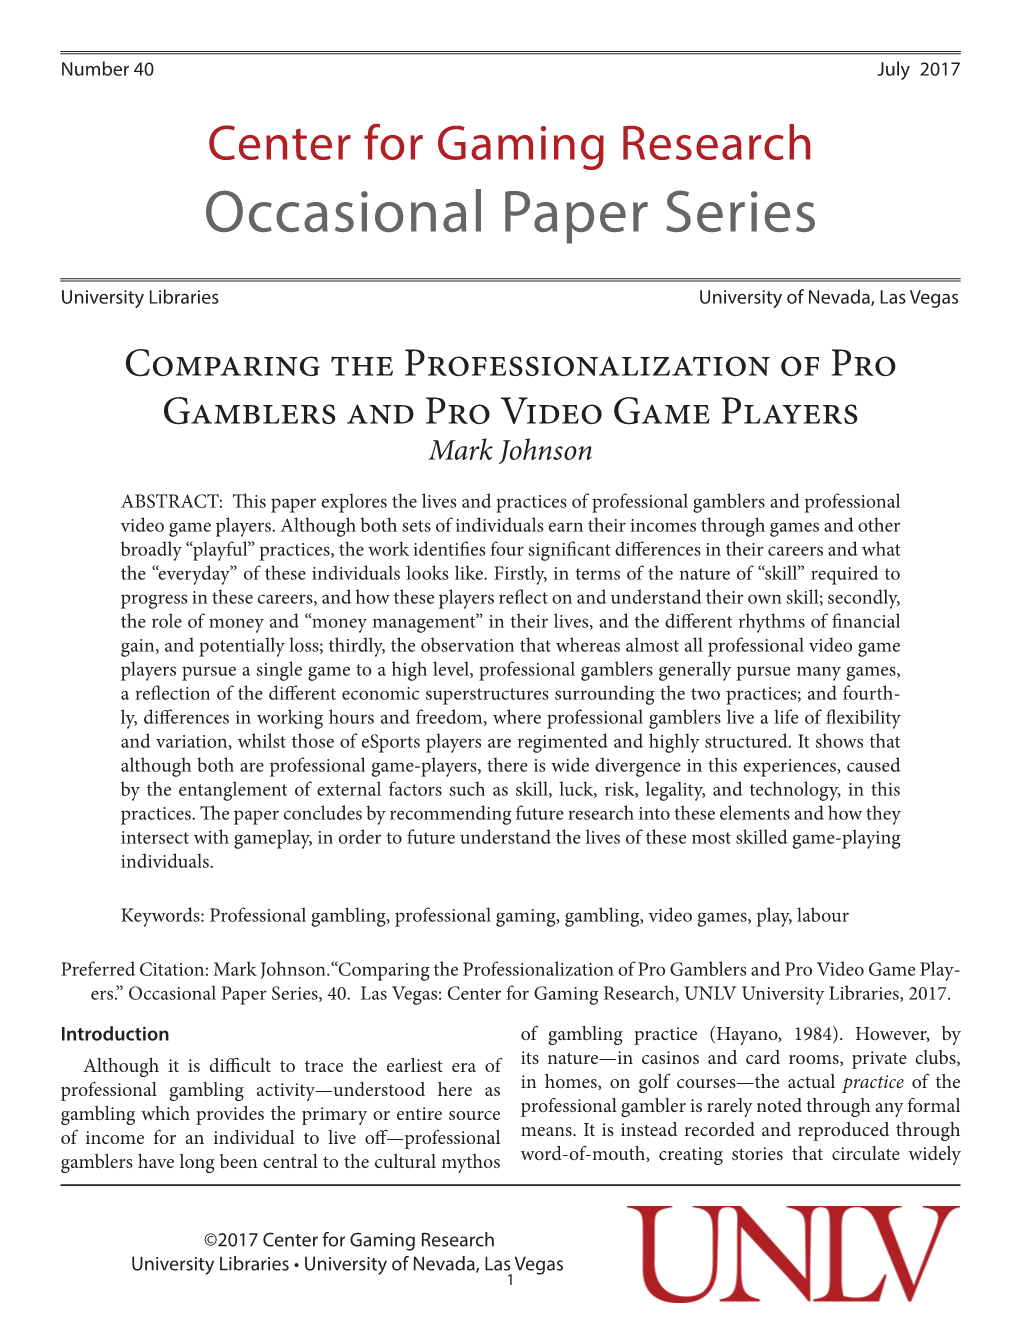 Comparing the Professionalization of Pro Gamblers and Pro Video Game Players Mark Johnson